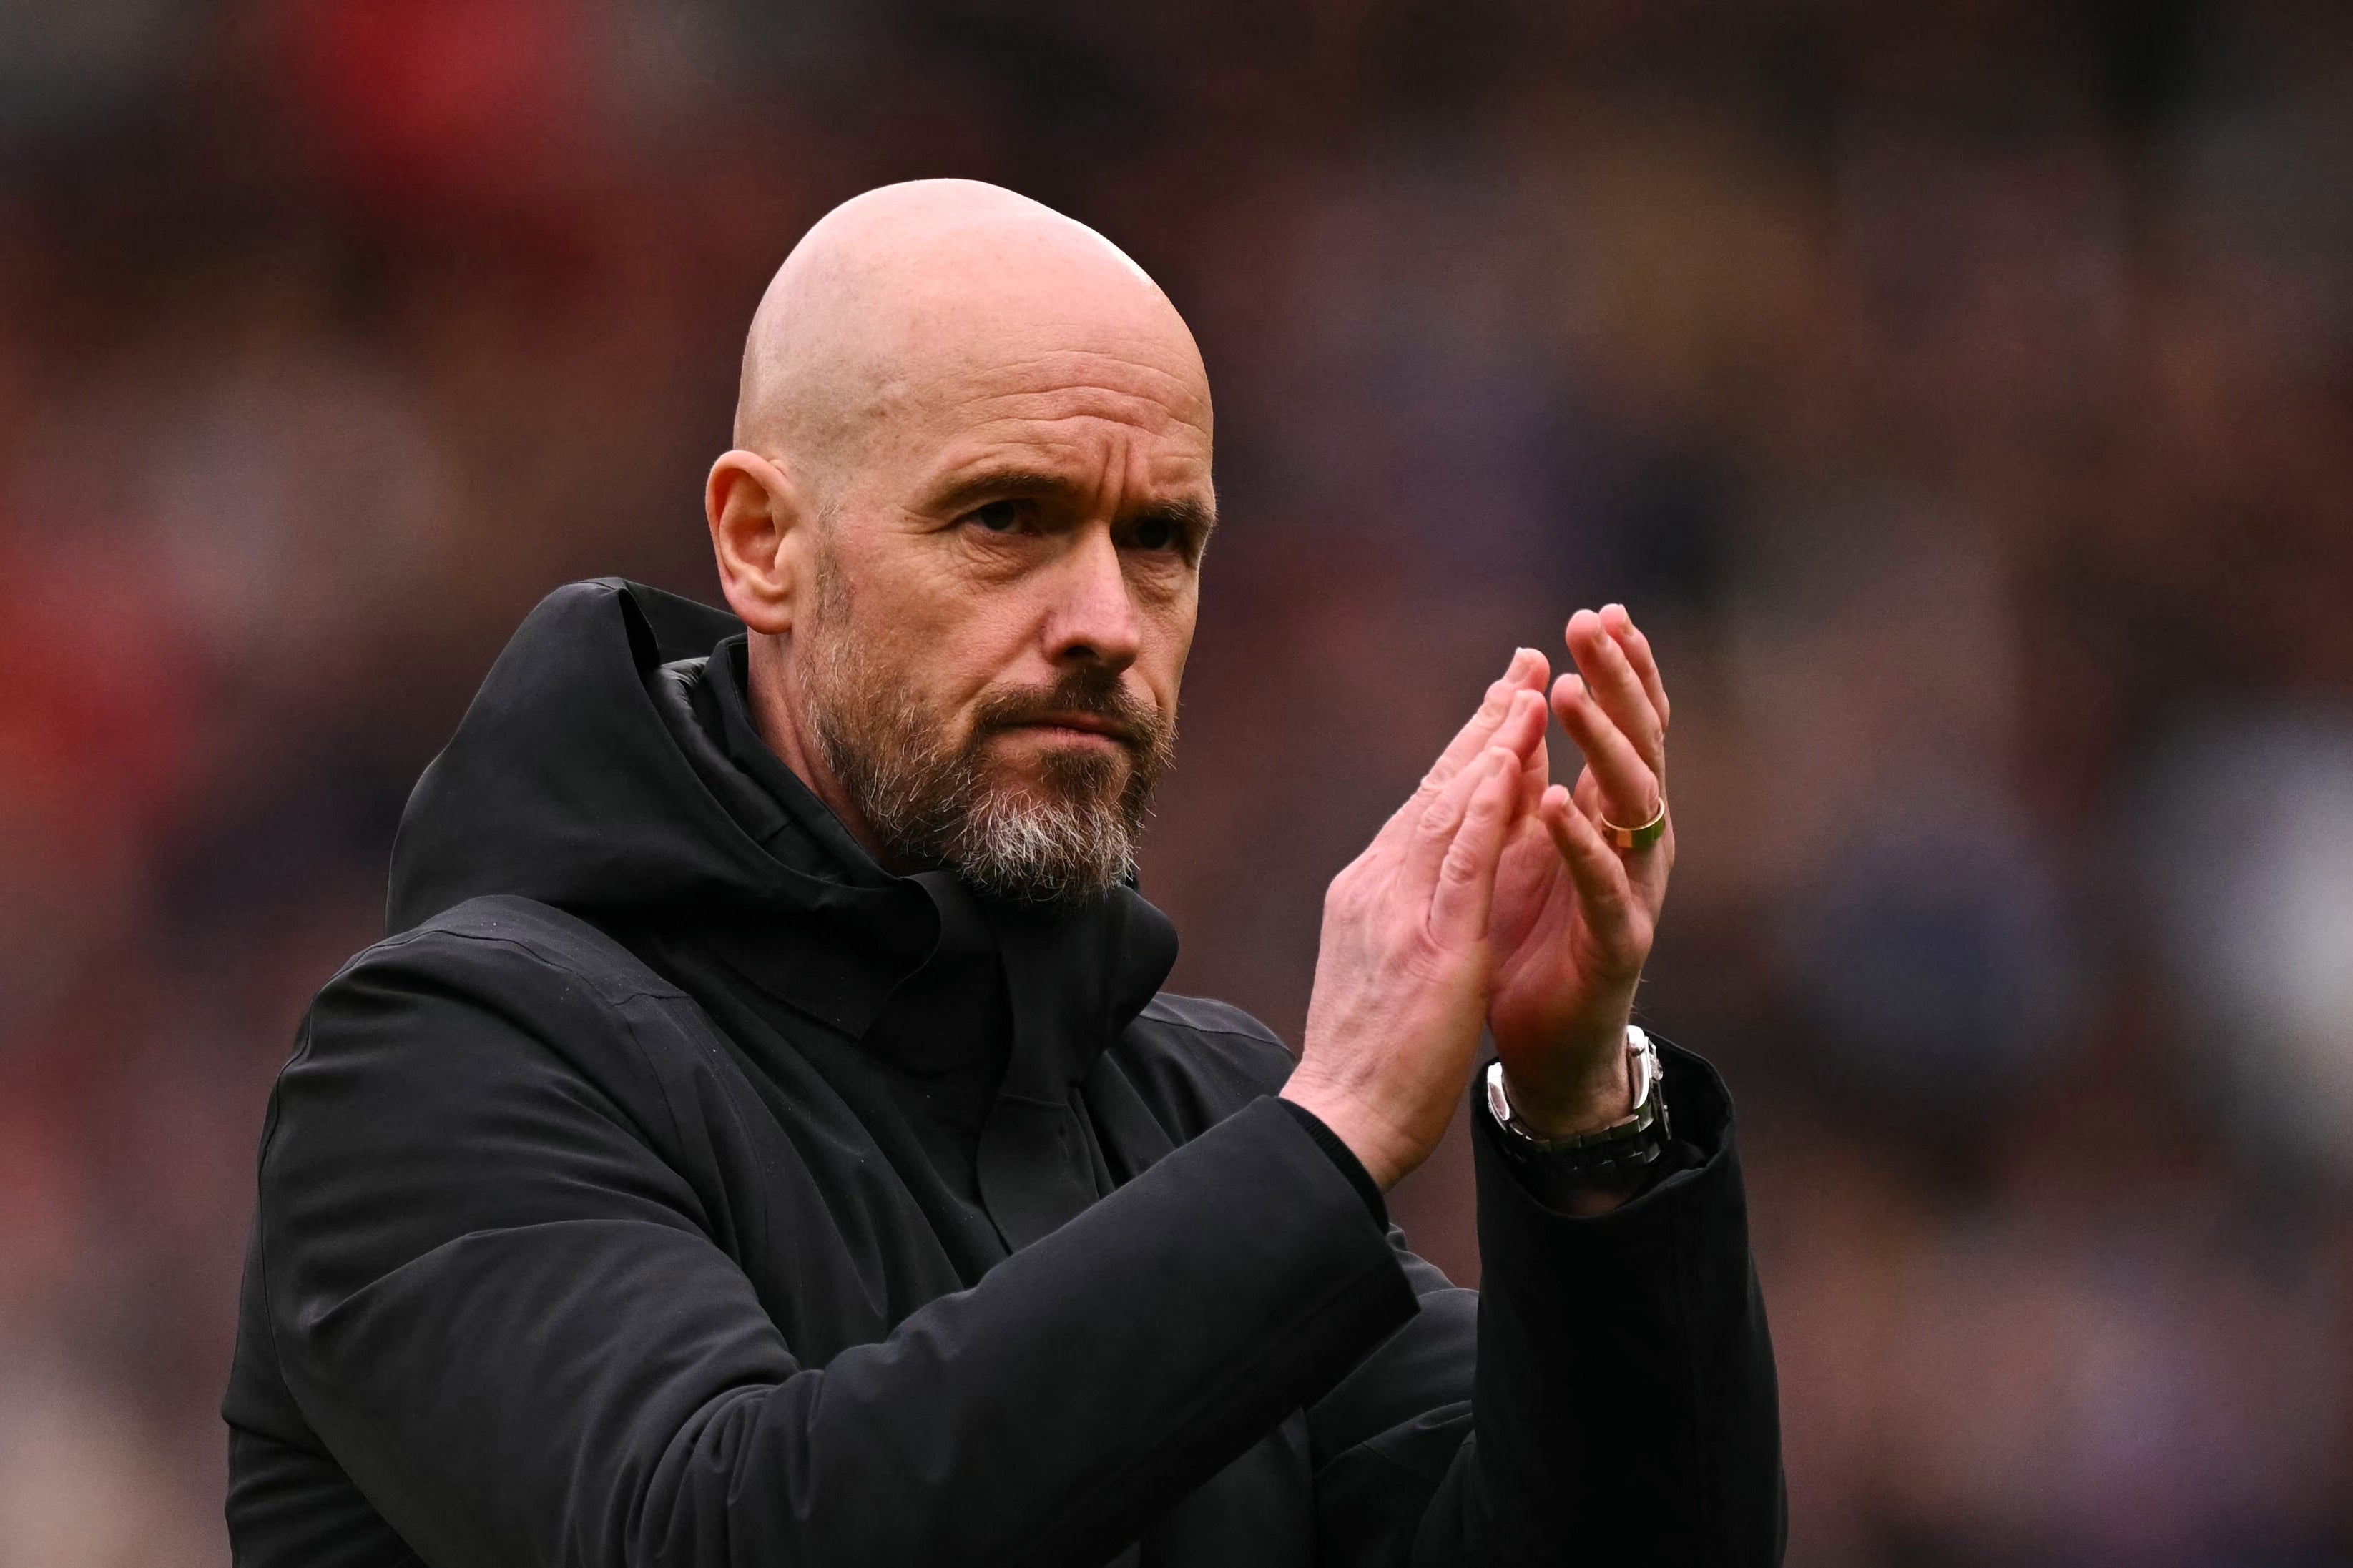 Ten Hag reflects on another poor performance by his team